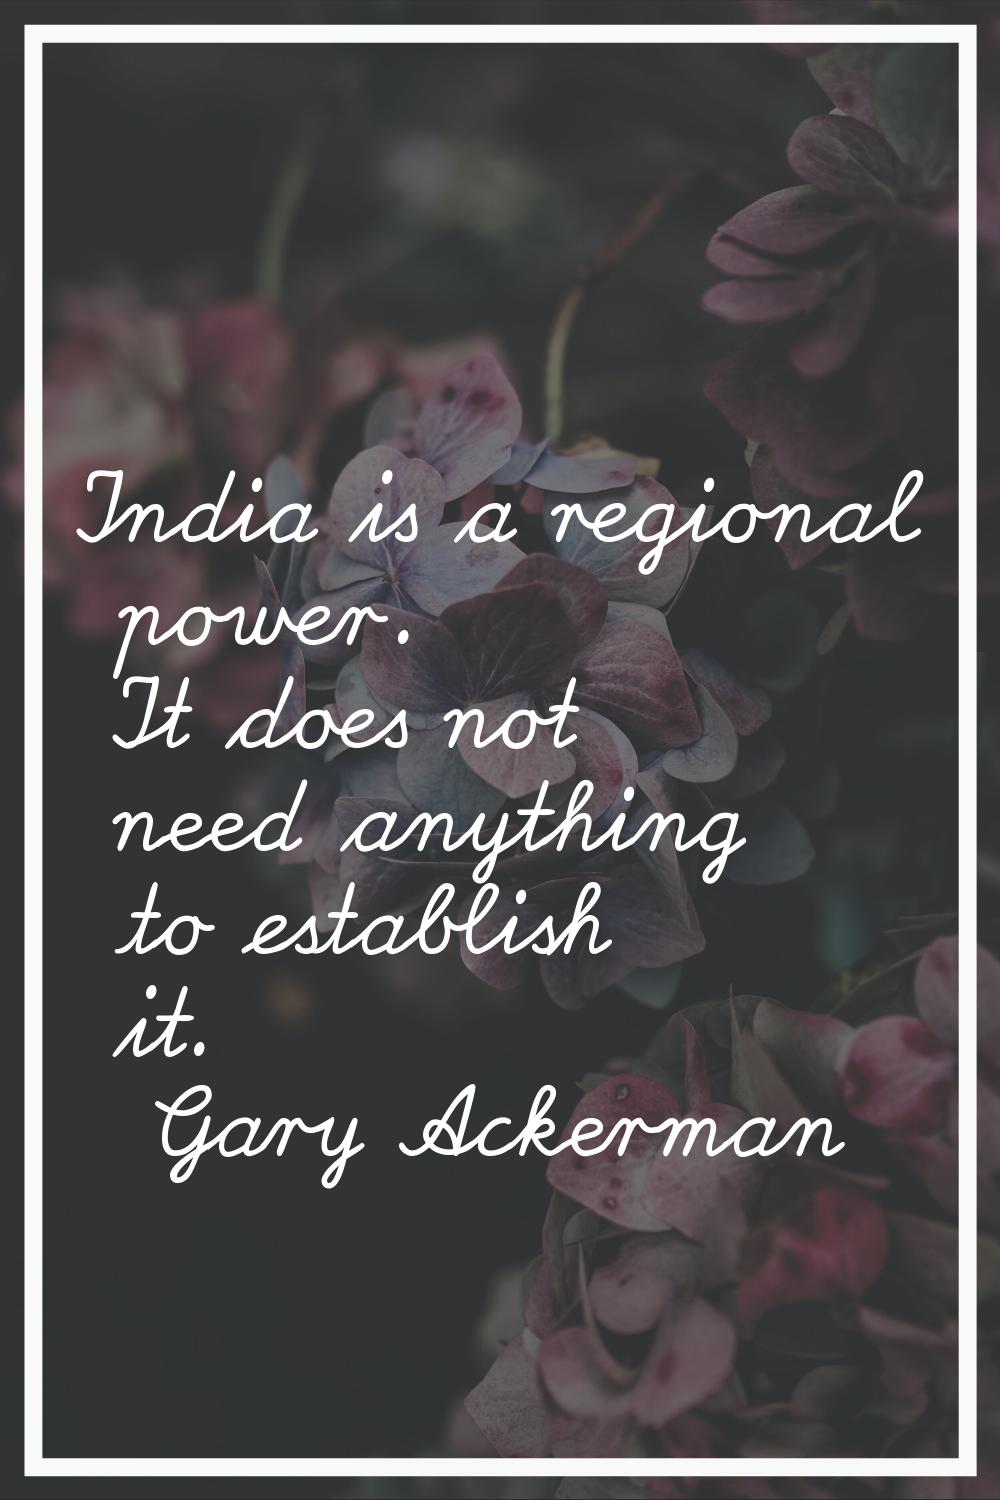 India is a regional power. It does not need anything to establish it.